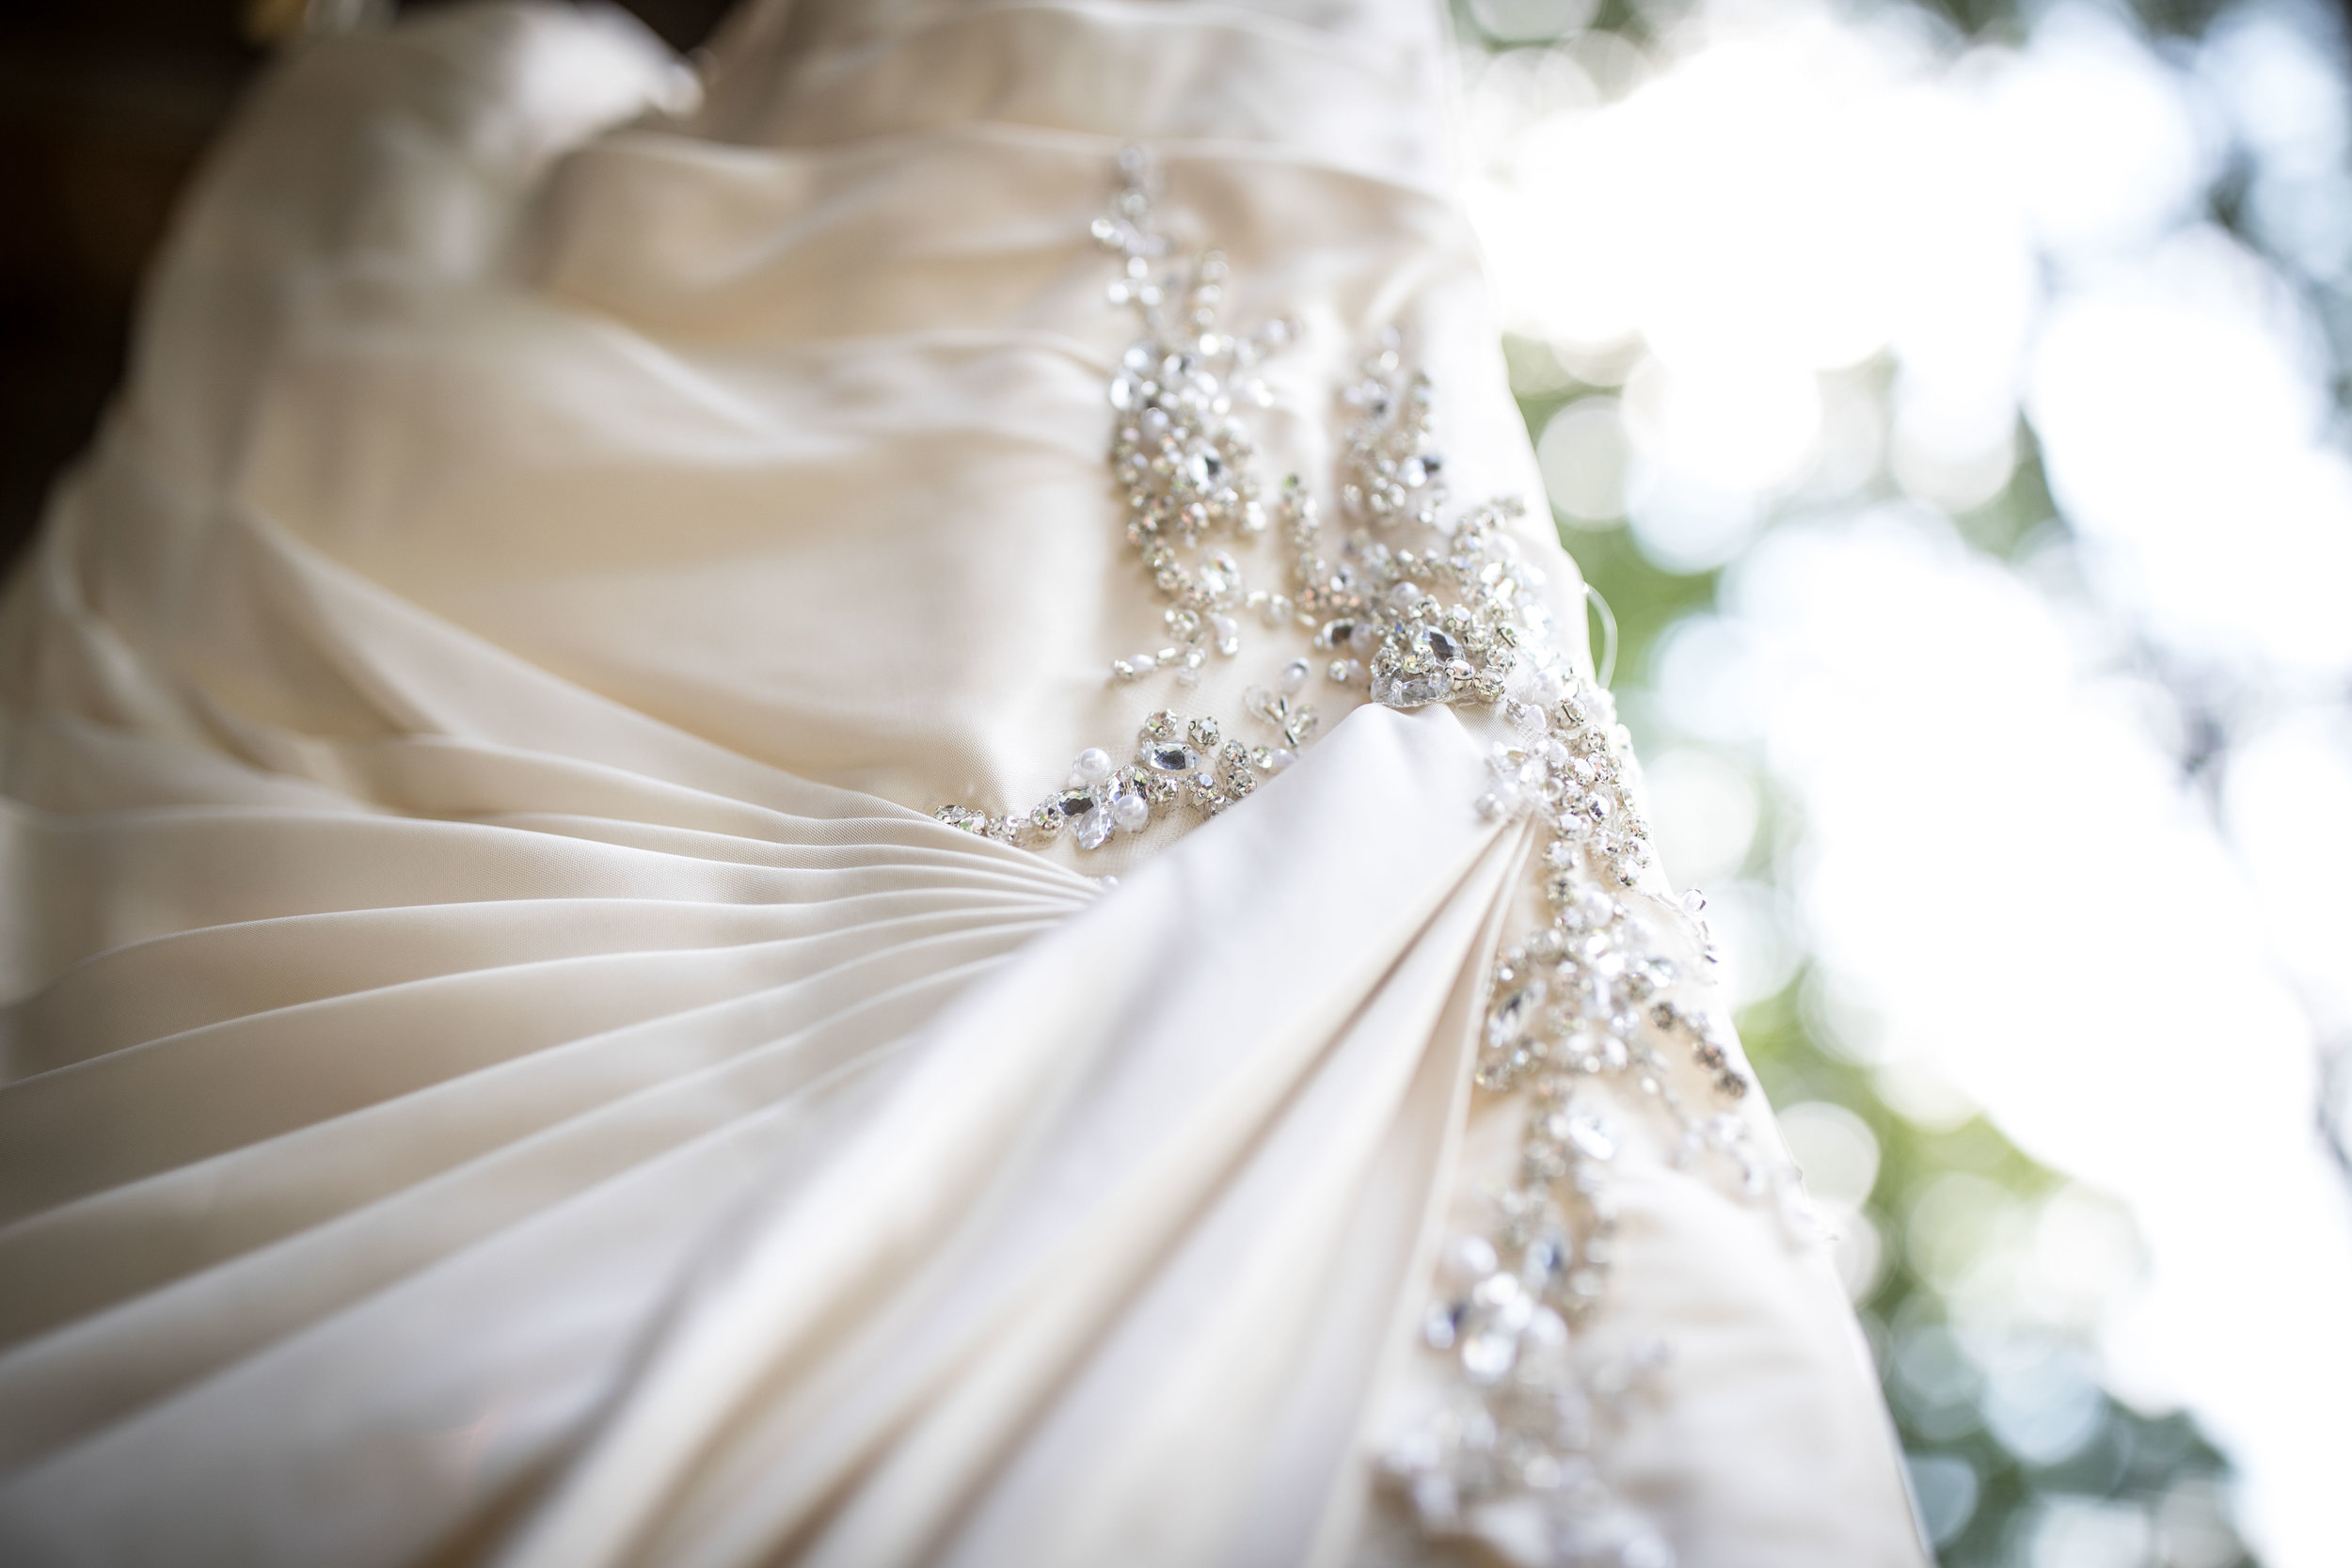  The white wedding dress hung to show close up detail 